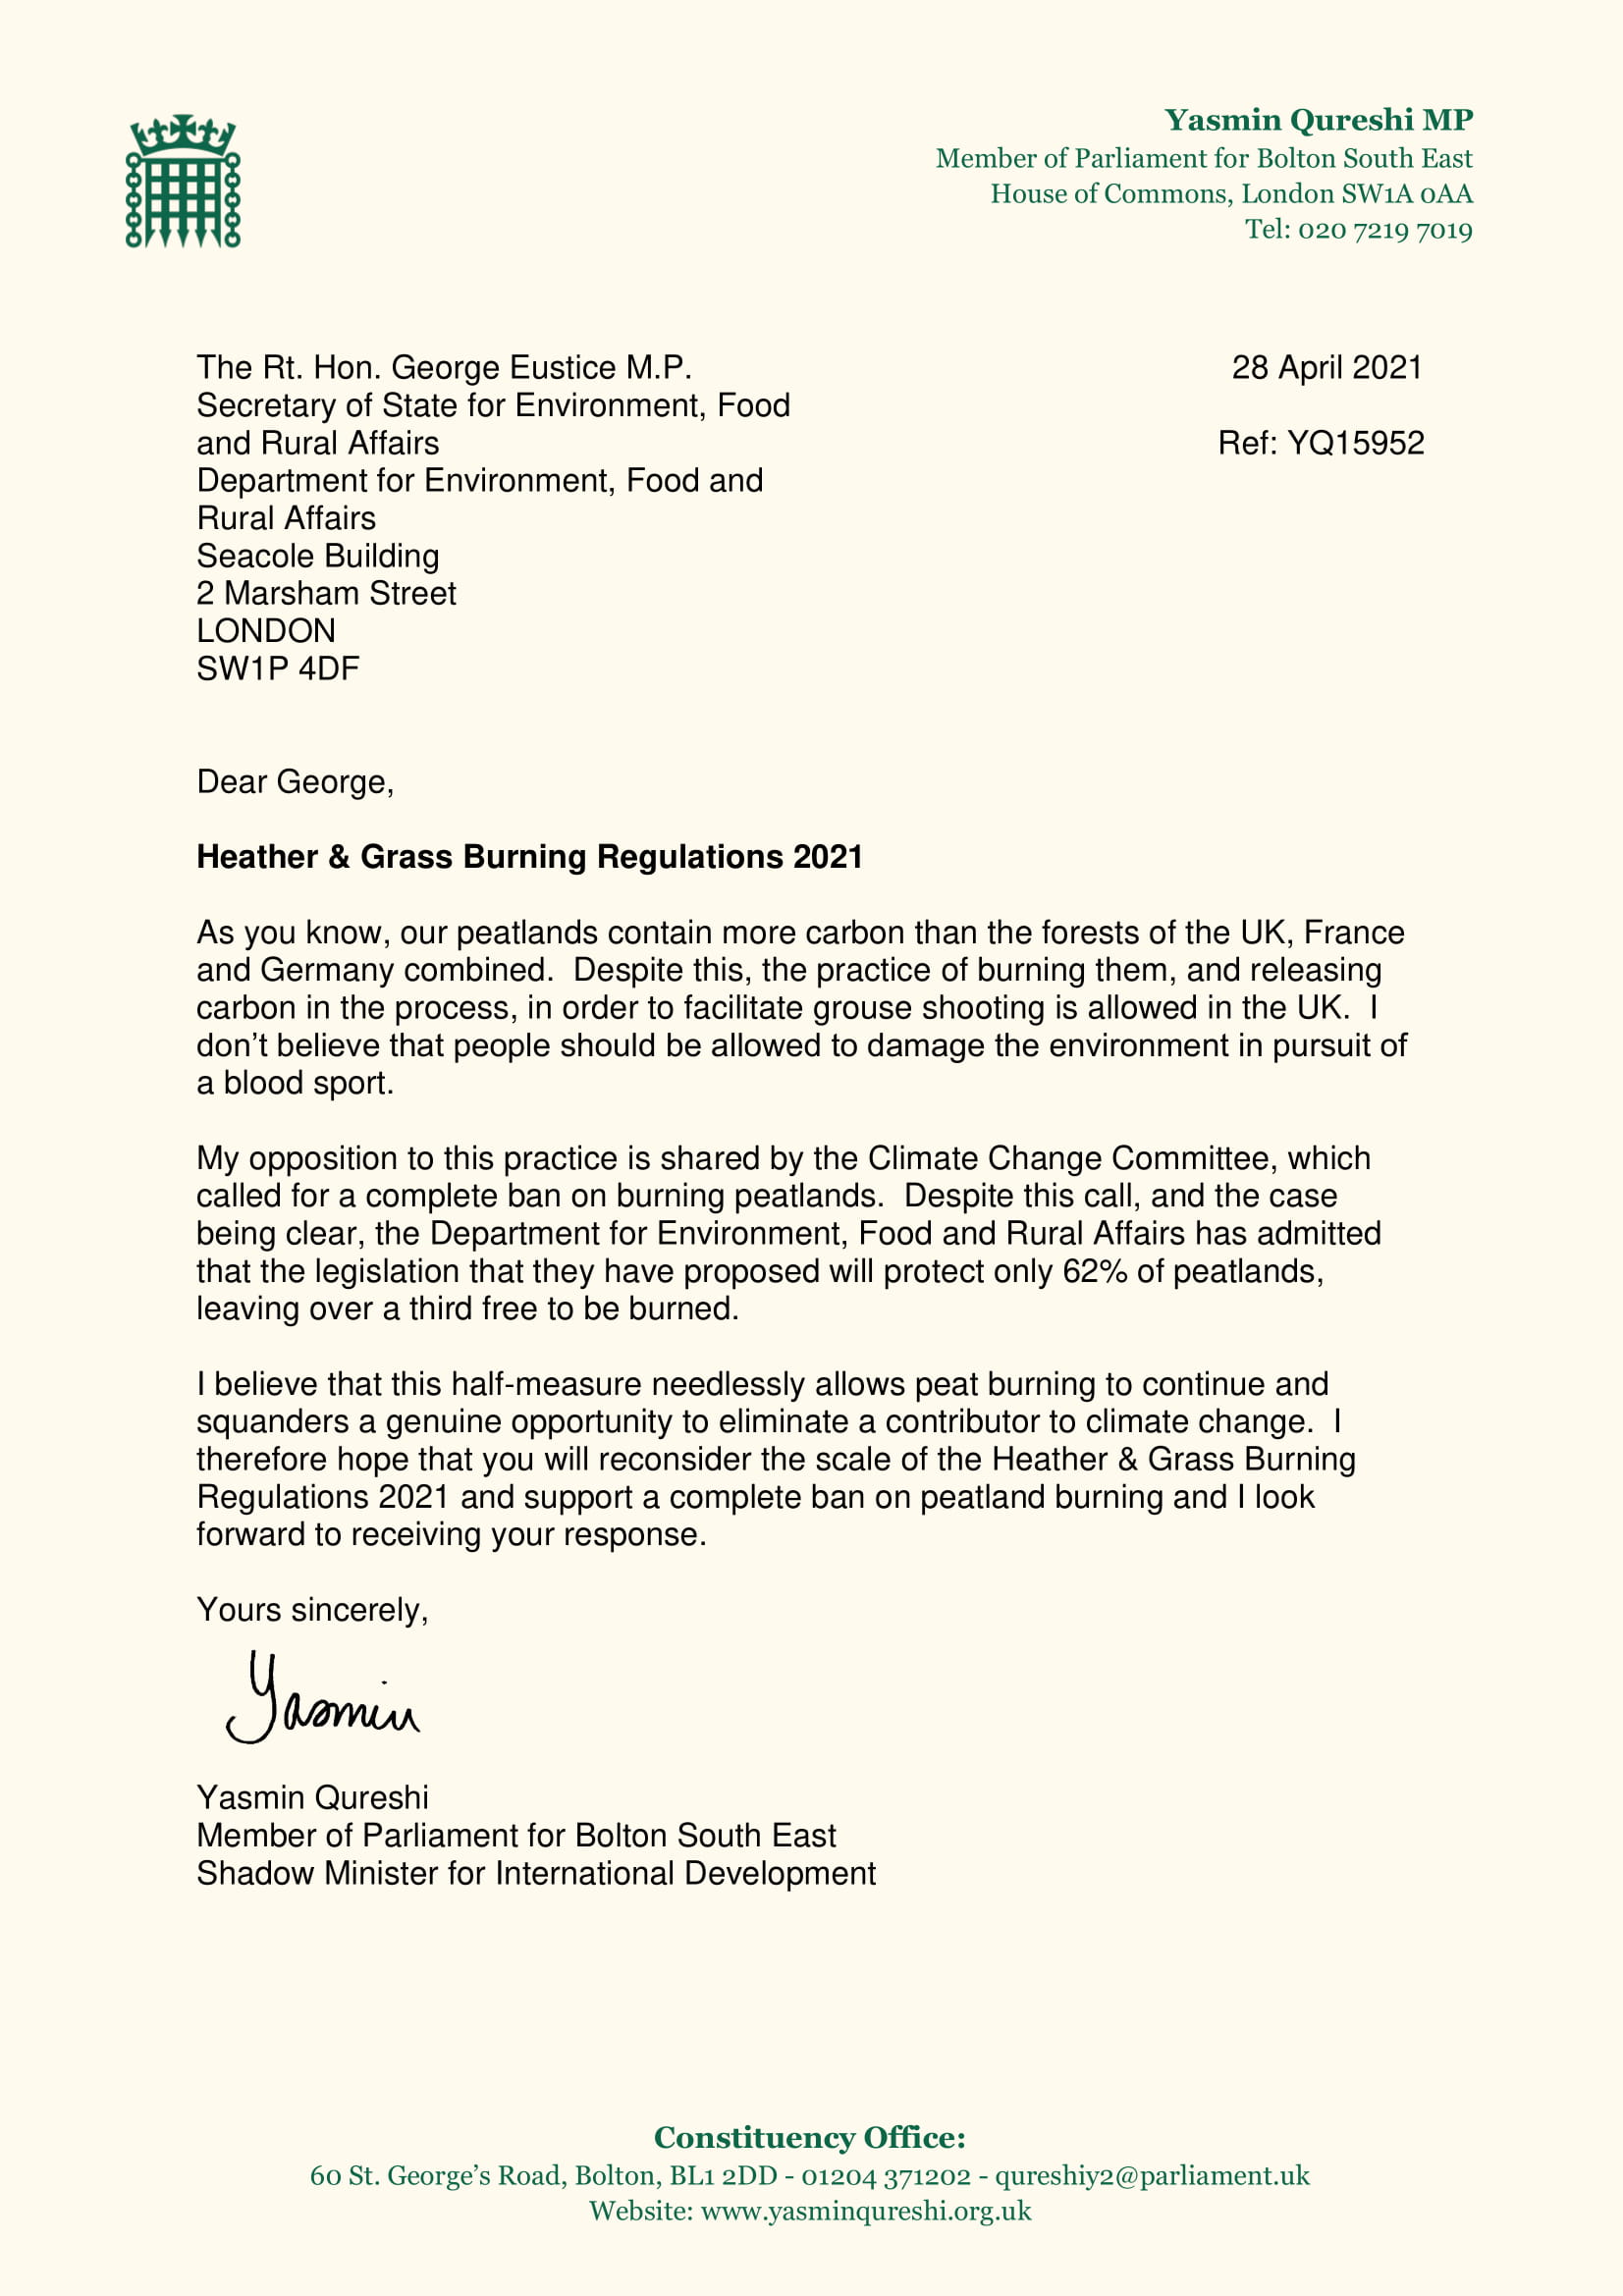 Letter to George Eustice